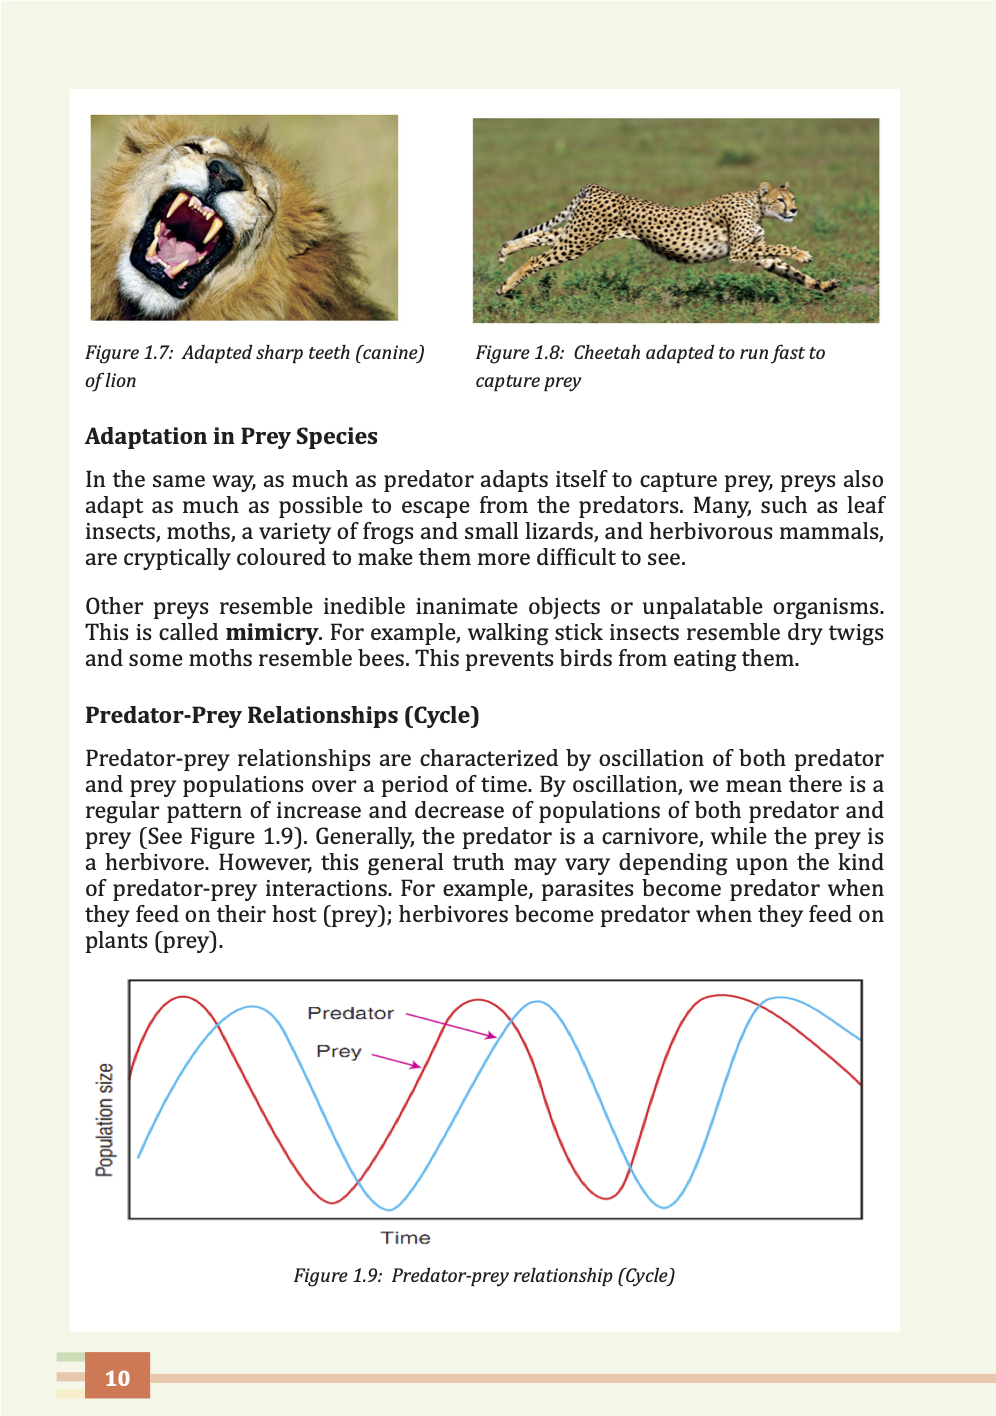 Figure 1.7: Adapted sharp teeth (canine) Figure 1.8: Cheetah adapted to run fast to 
of lion capture prey 

Adaptation in Prey Species 

In the same way, as much as predator adapts itself to capture prey, preys also 
adapt as much as possible to escape from the predators. Many, such as leaf 
insects, moths, a variety of frogs and small lizards, and herbivorous mammals, 
are cryptically coloured to make them more difficult to see. 

Other preys resemble inedible inanimate objects or unpalatable organisms. 
This is called mimicry. For example, walking stick insects resemble dry twigs 
and some moths resemble bees. This prevents birds from eating them.

Predator-Prey Relationships (Cycle)

Predator-prey relationships are characterized by oscillation of both predator 
and prey populations over a period of time. By oscillation, we mean there is a 
regular pattern of increase and decrease of populations of both predator and 
prey (See Figure 1.9). Generally, the predator is a carnivore, while the prey is 
a herbivore. However, this general truth may vary depending upon the kind 
of predator-prey interactions. For example, parasites become predator when 
they feed on their host (prey); herbivores become predator when they feed on 
plants (prey).

Figure 1.9: Predator-prey relationship (Cycle)